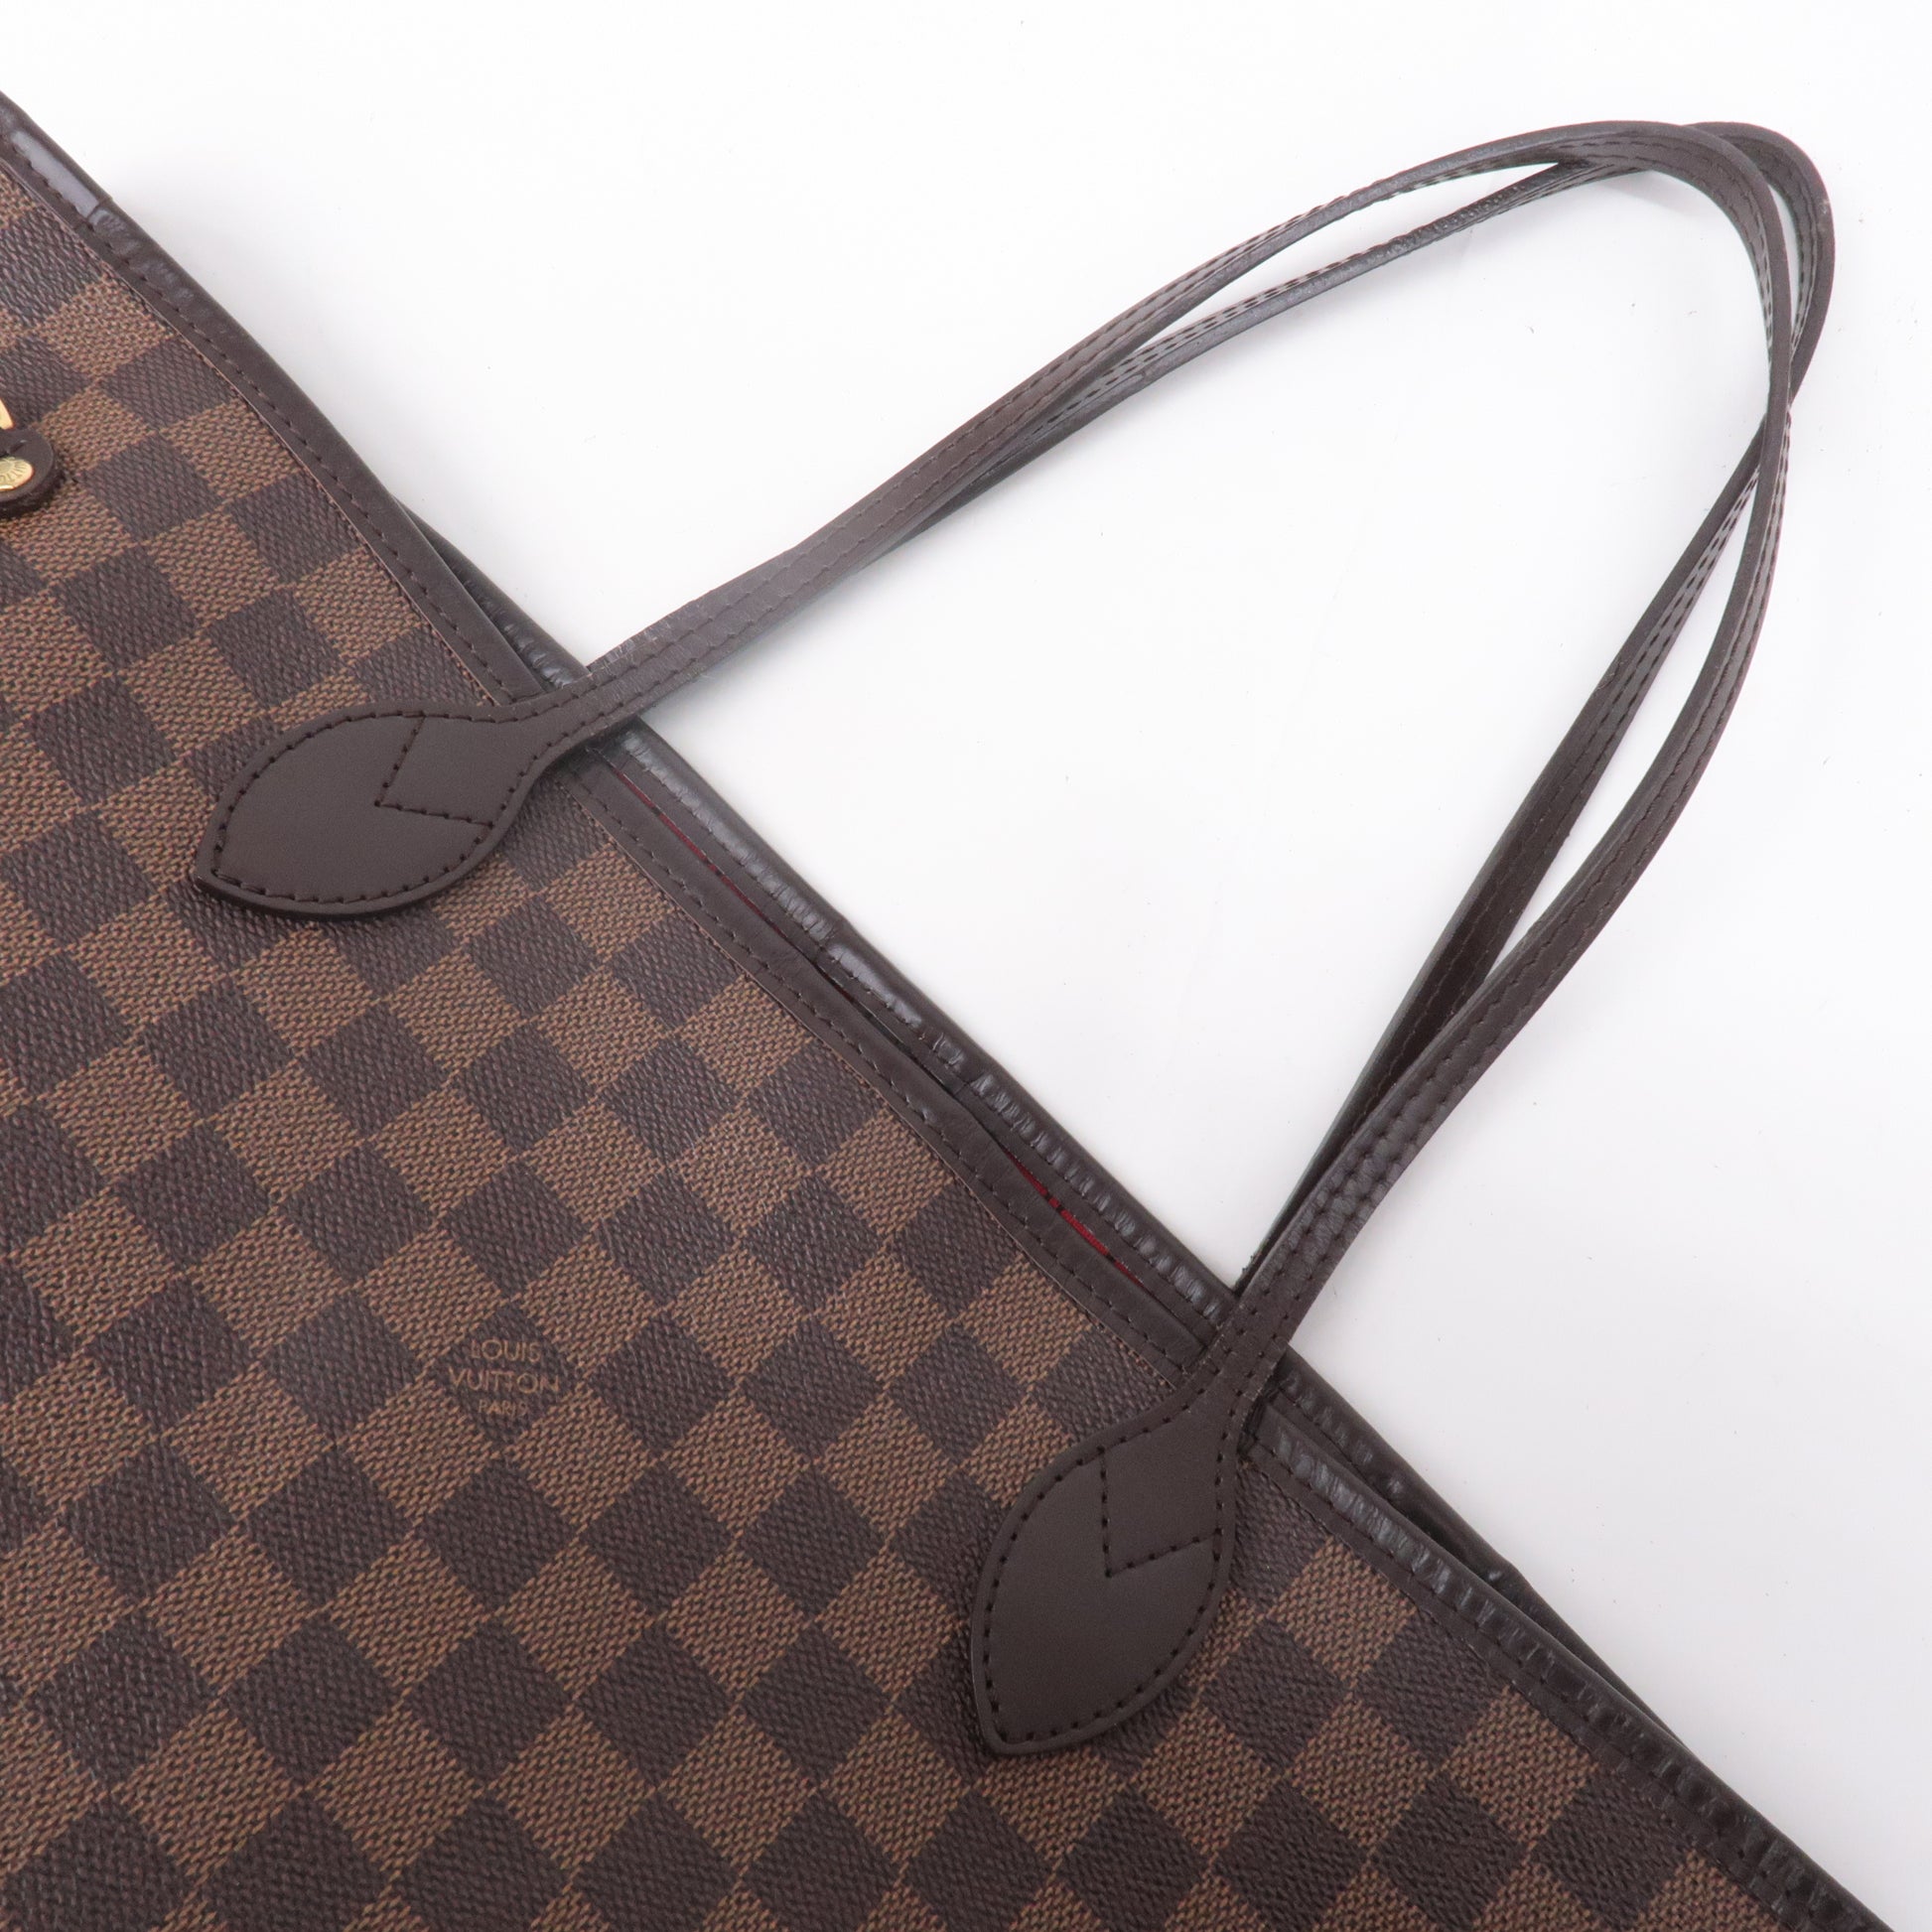 Louis Vuitton (LV) Damier Neverfull MM Bag N51105 = Authentic or